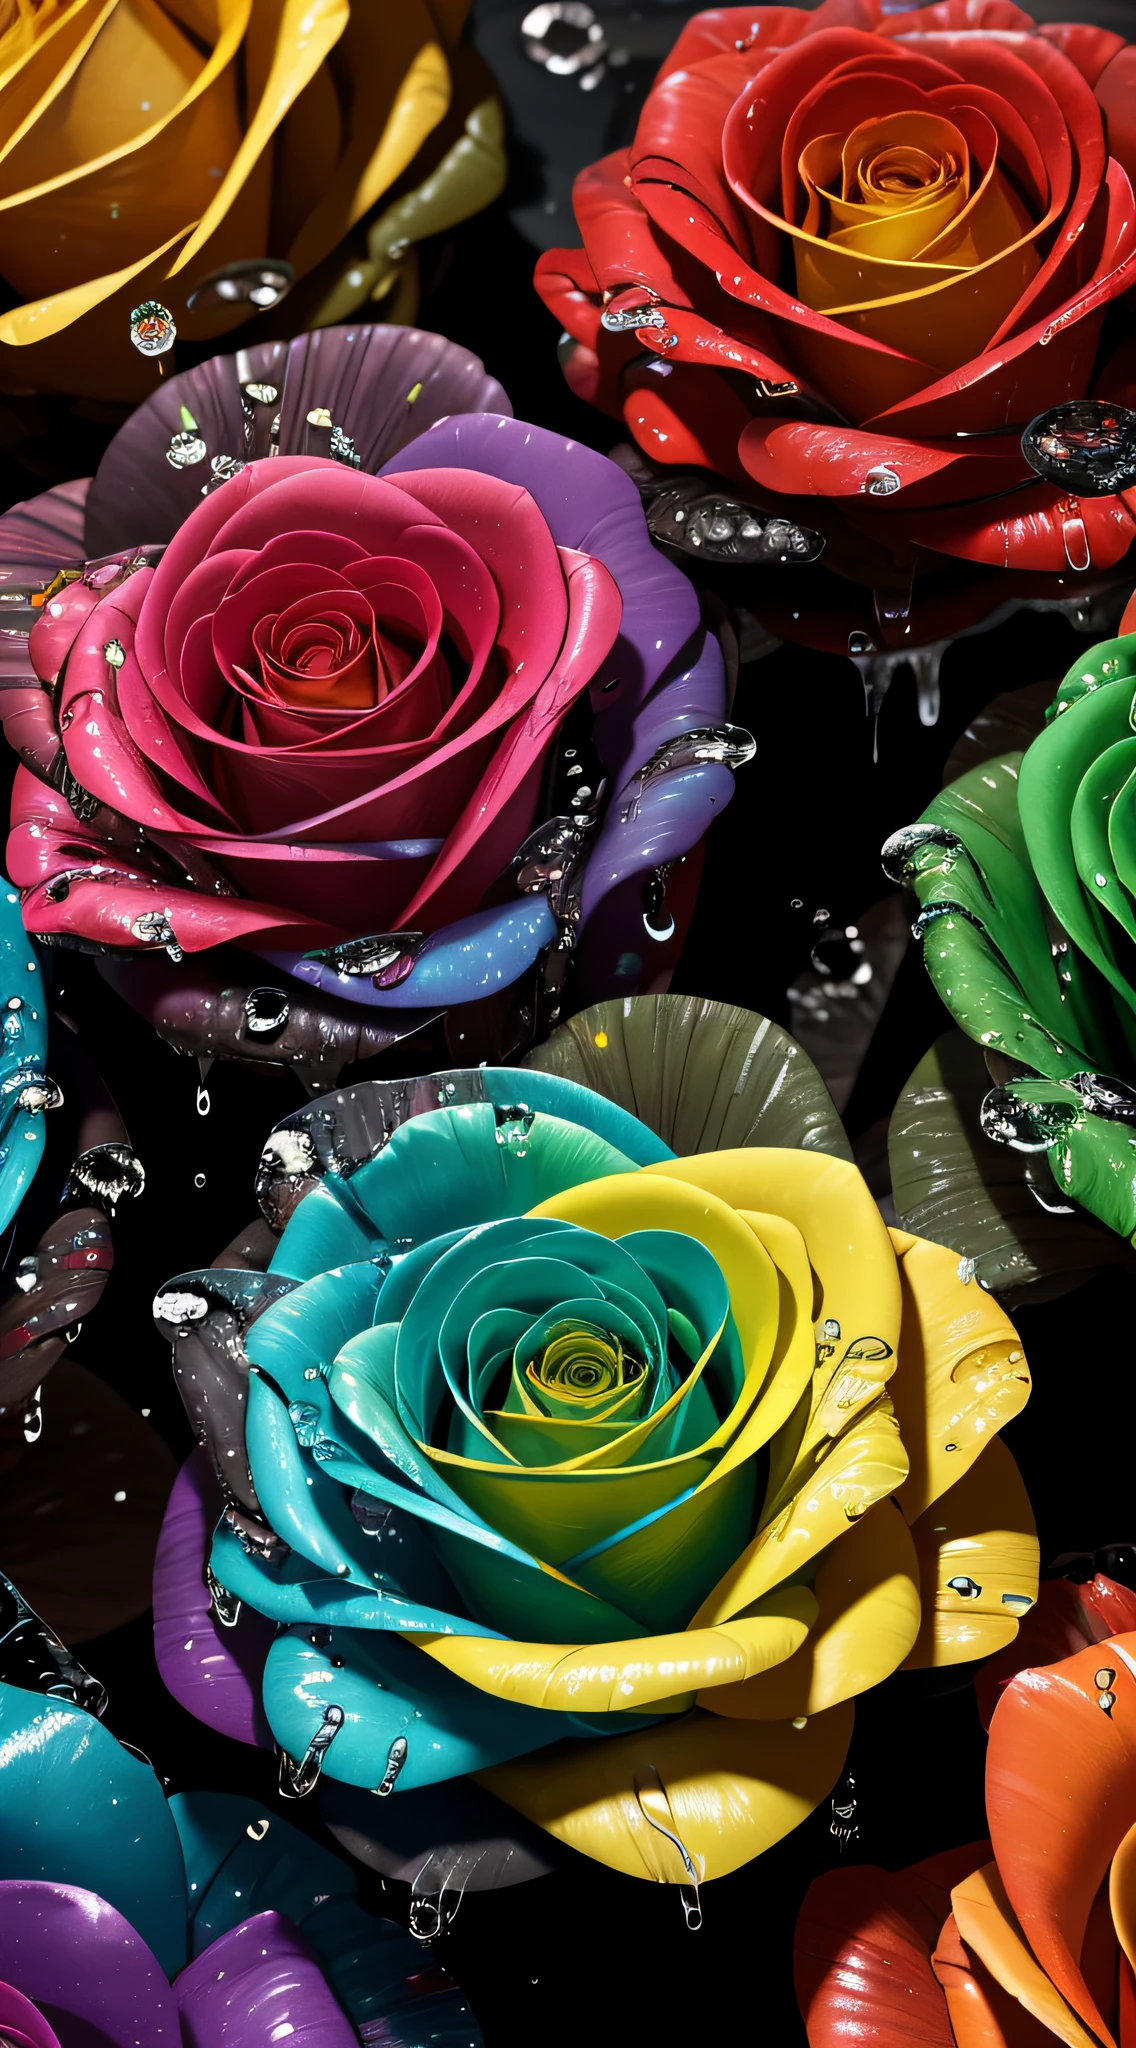 Brightly colored roses are arranged in a circle with water 